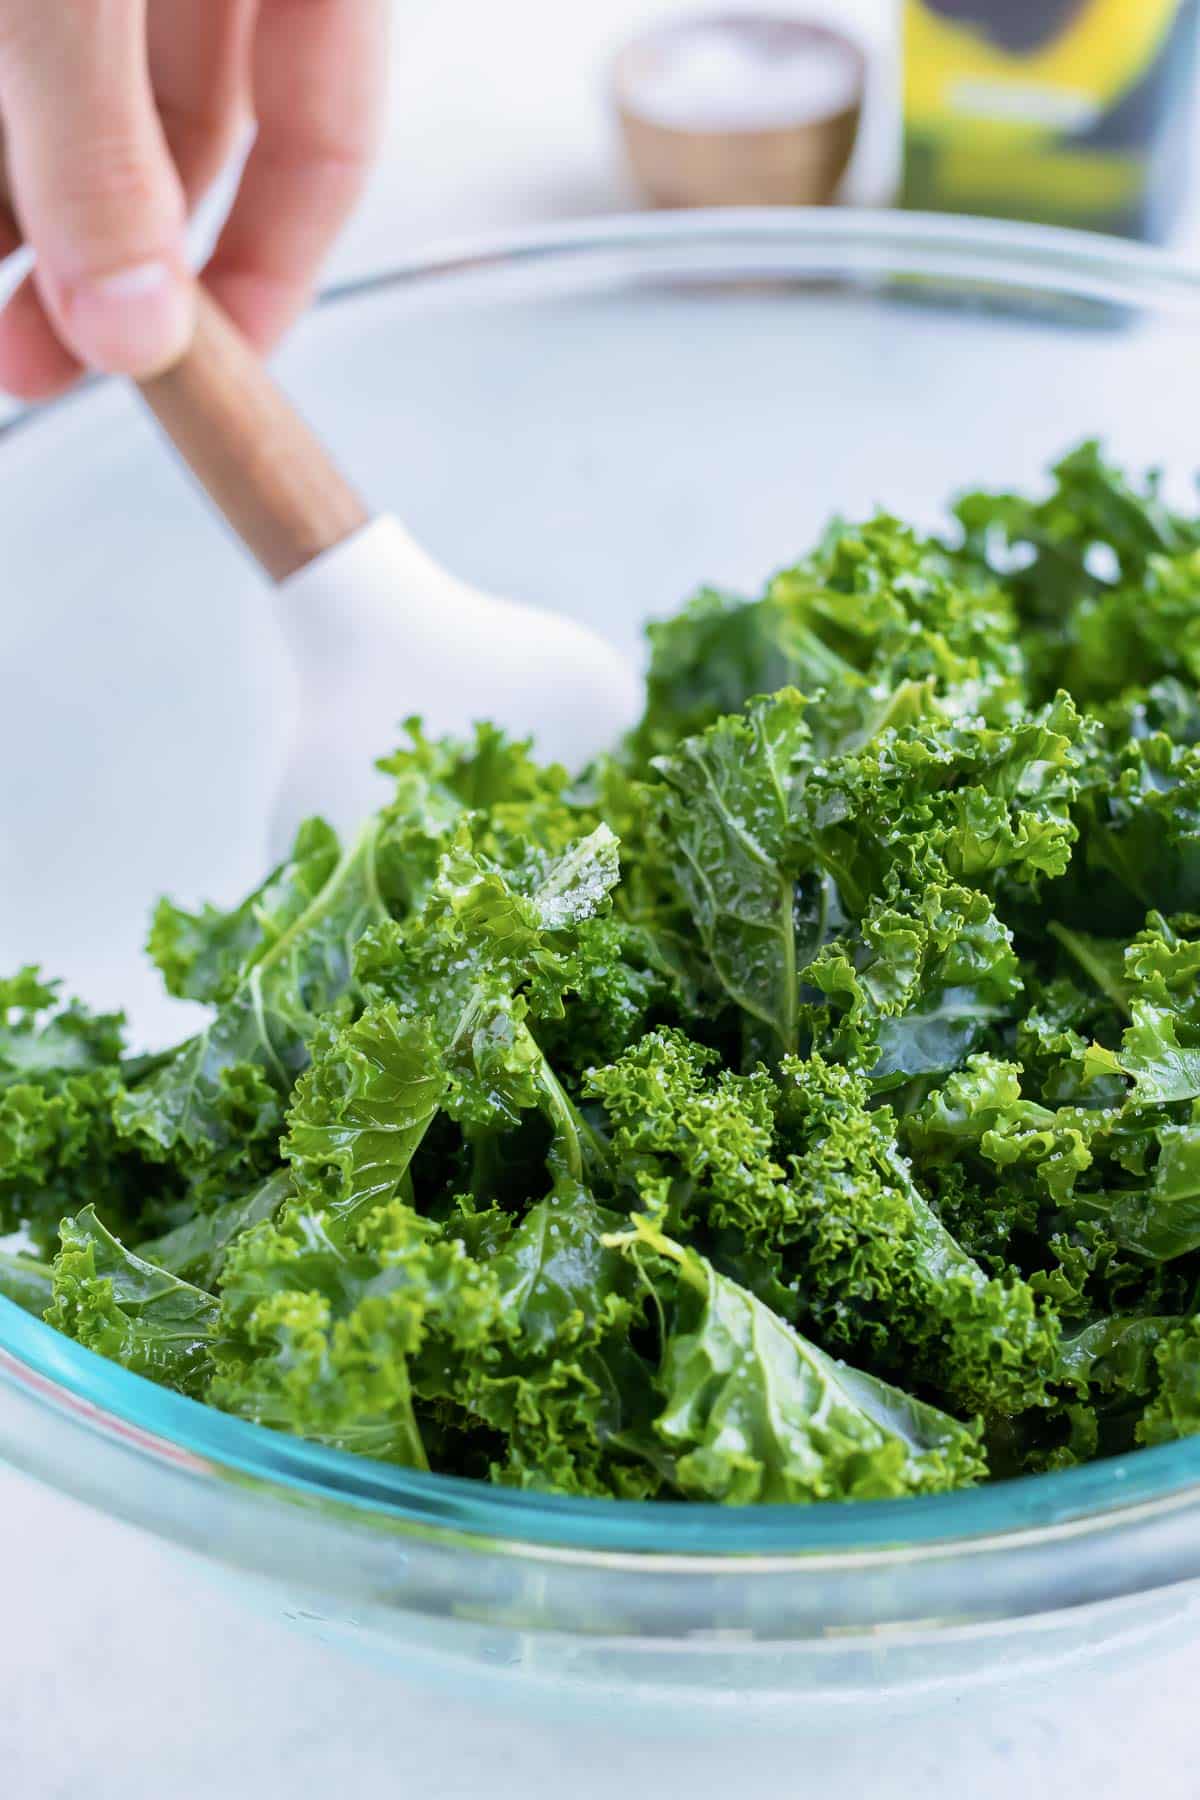 The prepared kale leaves are tossed with oil and salt in a bowl.